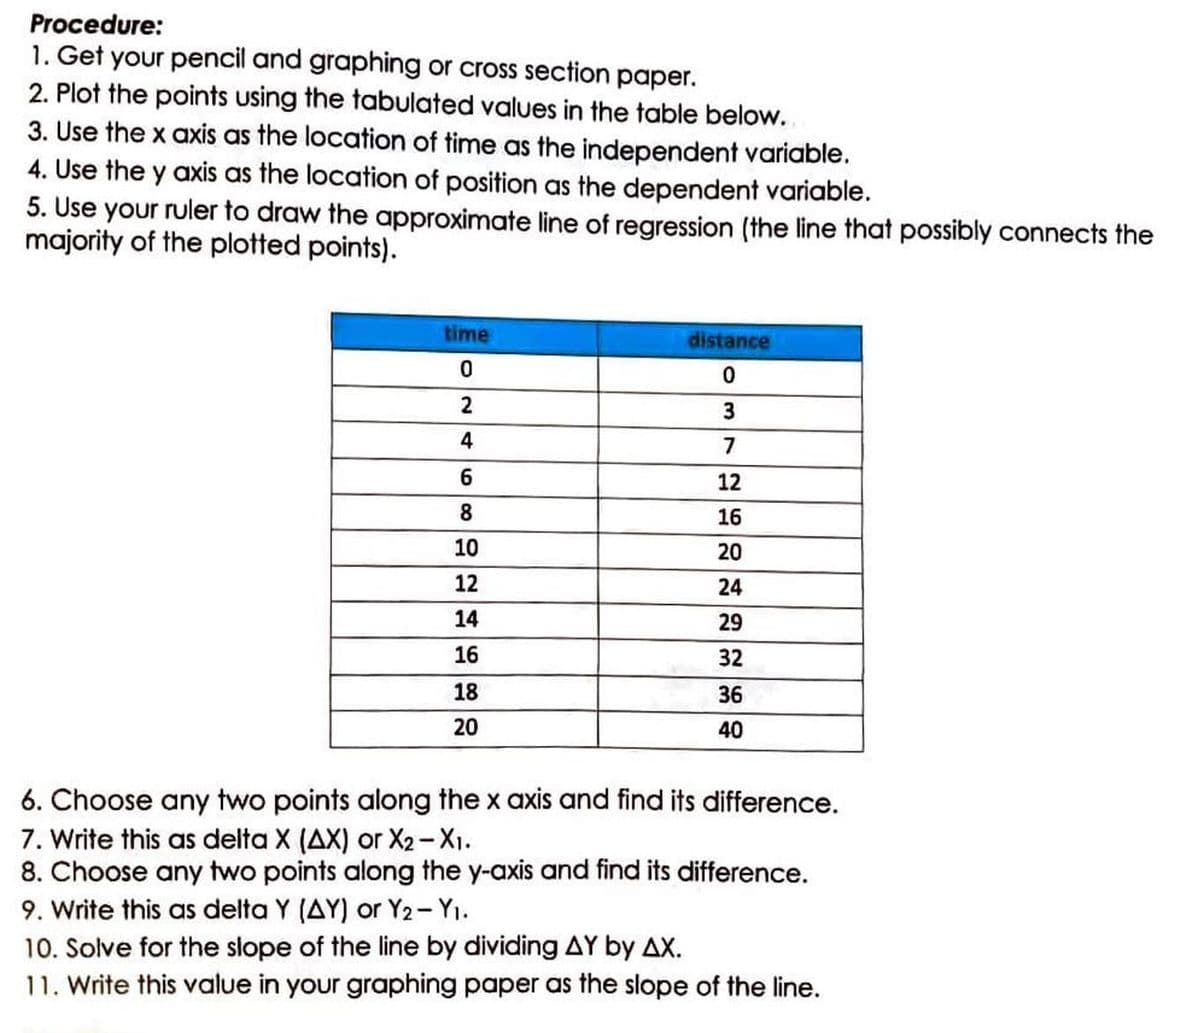 Procedure:
1. Get your pencil and graphing or cross section paper.
2. Plot the points using the tabulated values in the table below.
3. Use the x axis as the location of time as the independent variable.
4. Use the y axis as the location of position as the dependent variable.
5. Use your ruler to draw the approximate line of regression (the line that possibly connects the
majority of the plotted points).
time
0
2
4
6
8
10
12
14
16
18
20
distance
0
3
7
12
16
20
24
29
32
36
40
6. Choose any two points along the x axis and find its difference.
7. Write this as delta X (AX) or X2-X₁.
8. Choose any two points along the y-axis and find its difference.
9. Write this as delta Y (AY) or Y2-Y₁.
10. Solve for the slope of the line by dividing AY by AX.
11. Write this value in your graphing paper as the slope of the line.